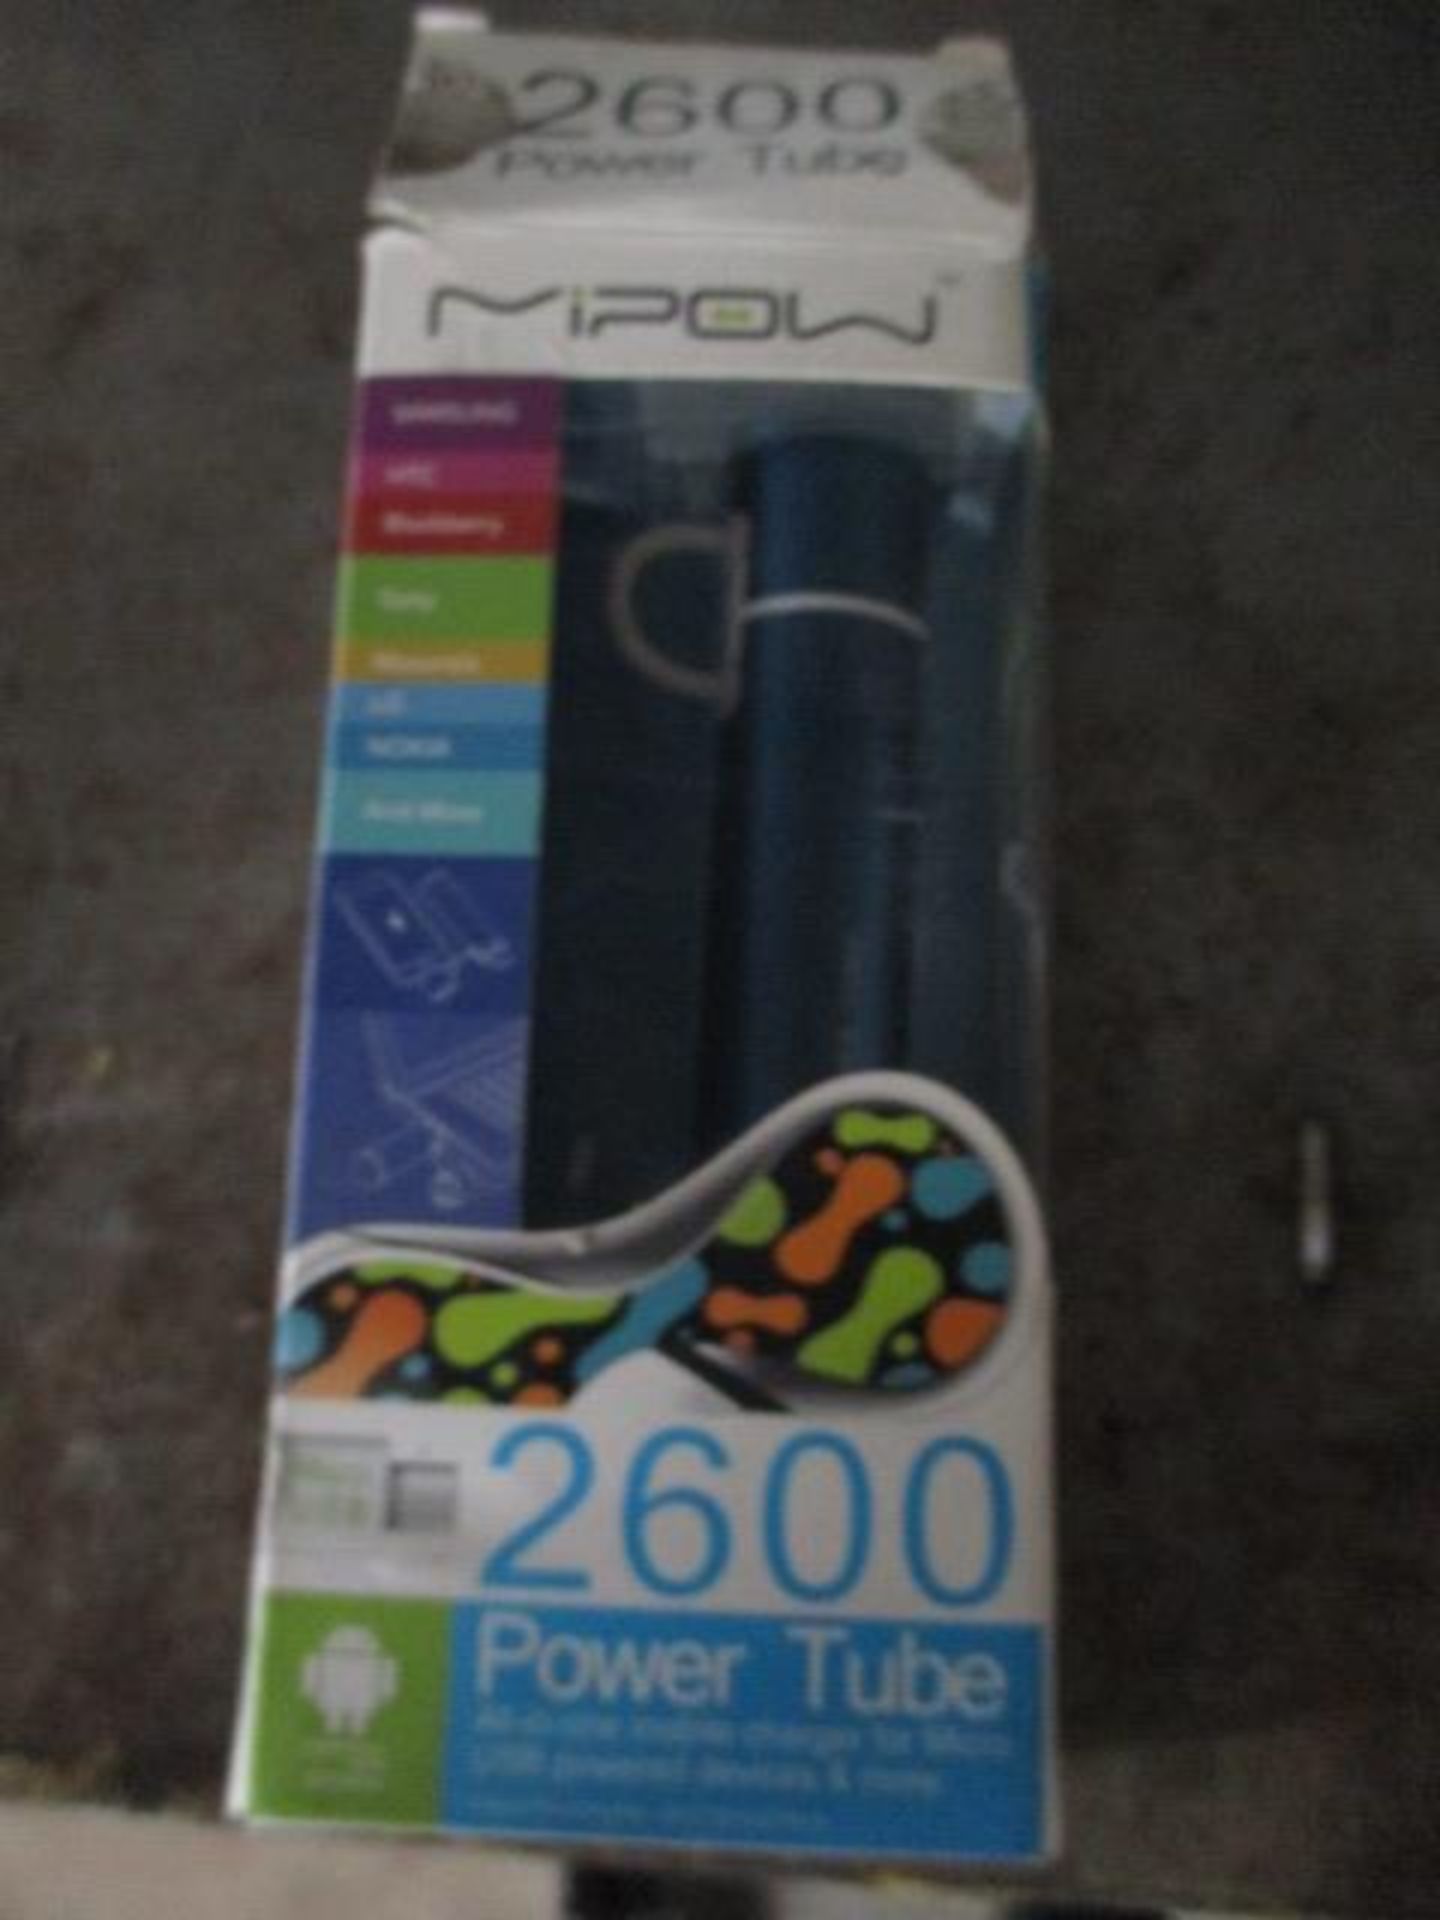 MiPow 2600 Power Tube - looks a bit battered packaging but unit looks new but unchecked by us rrp £